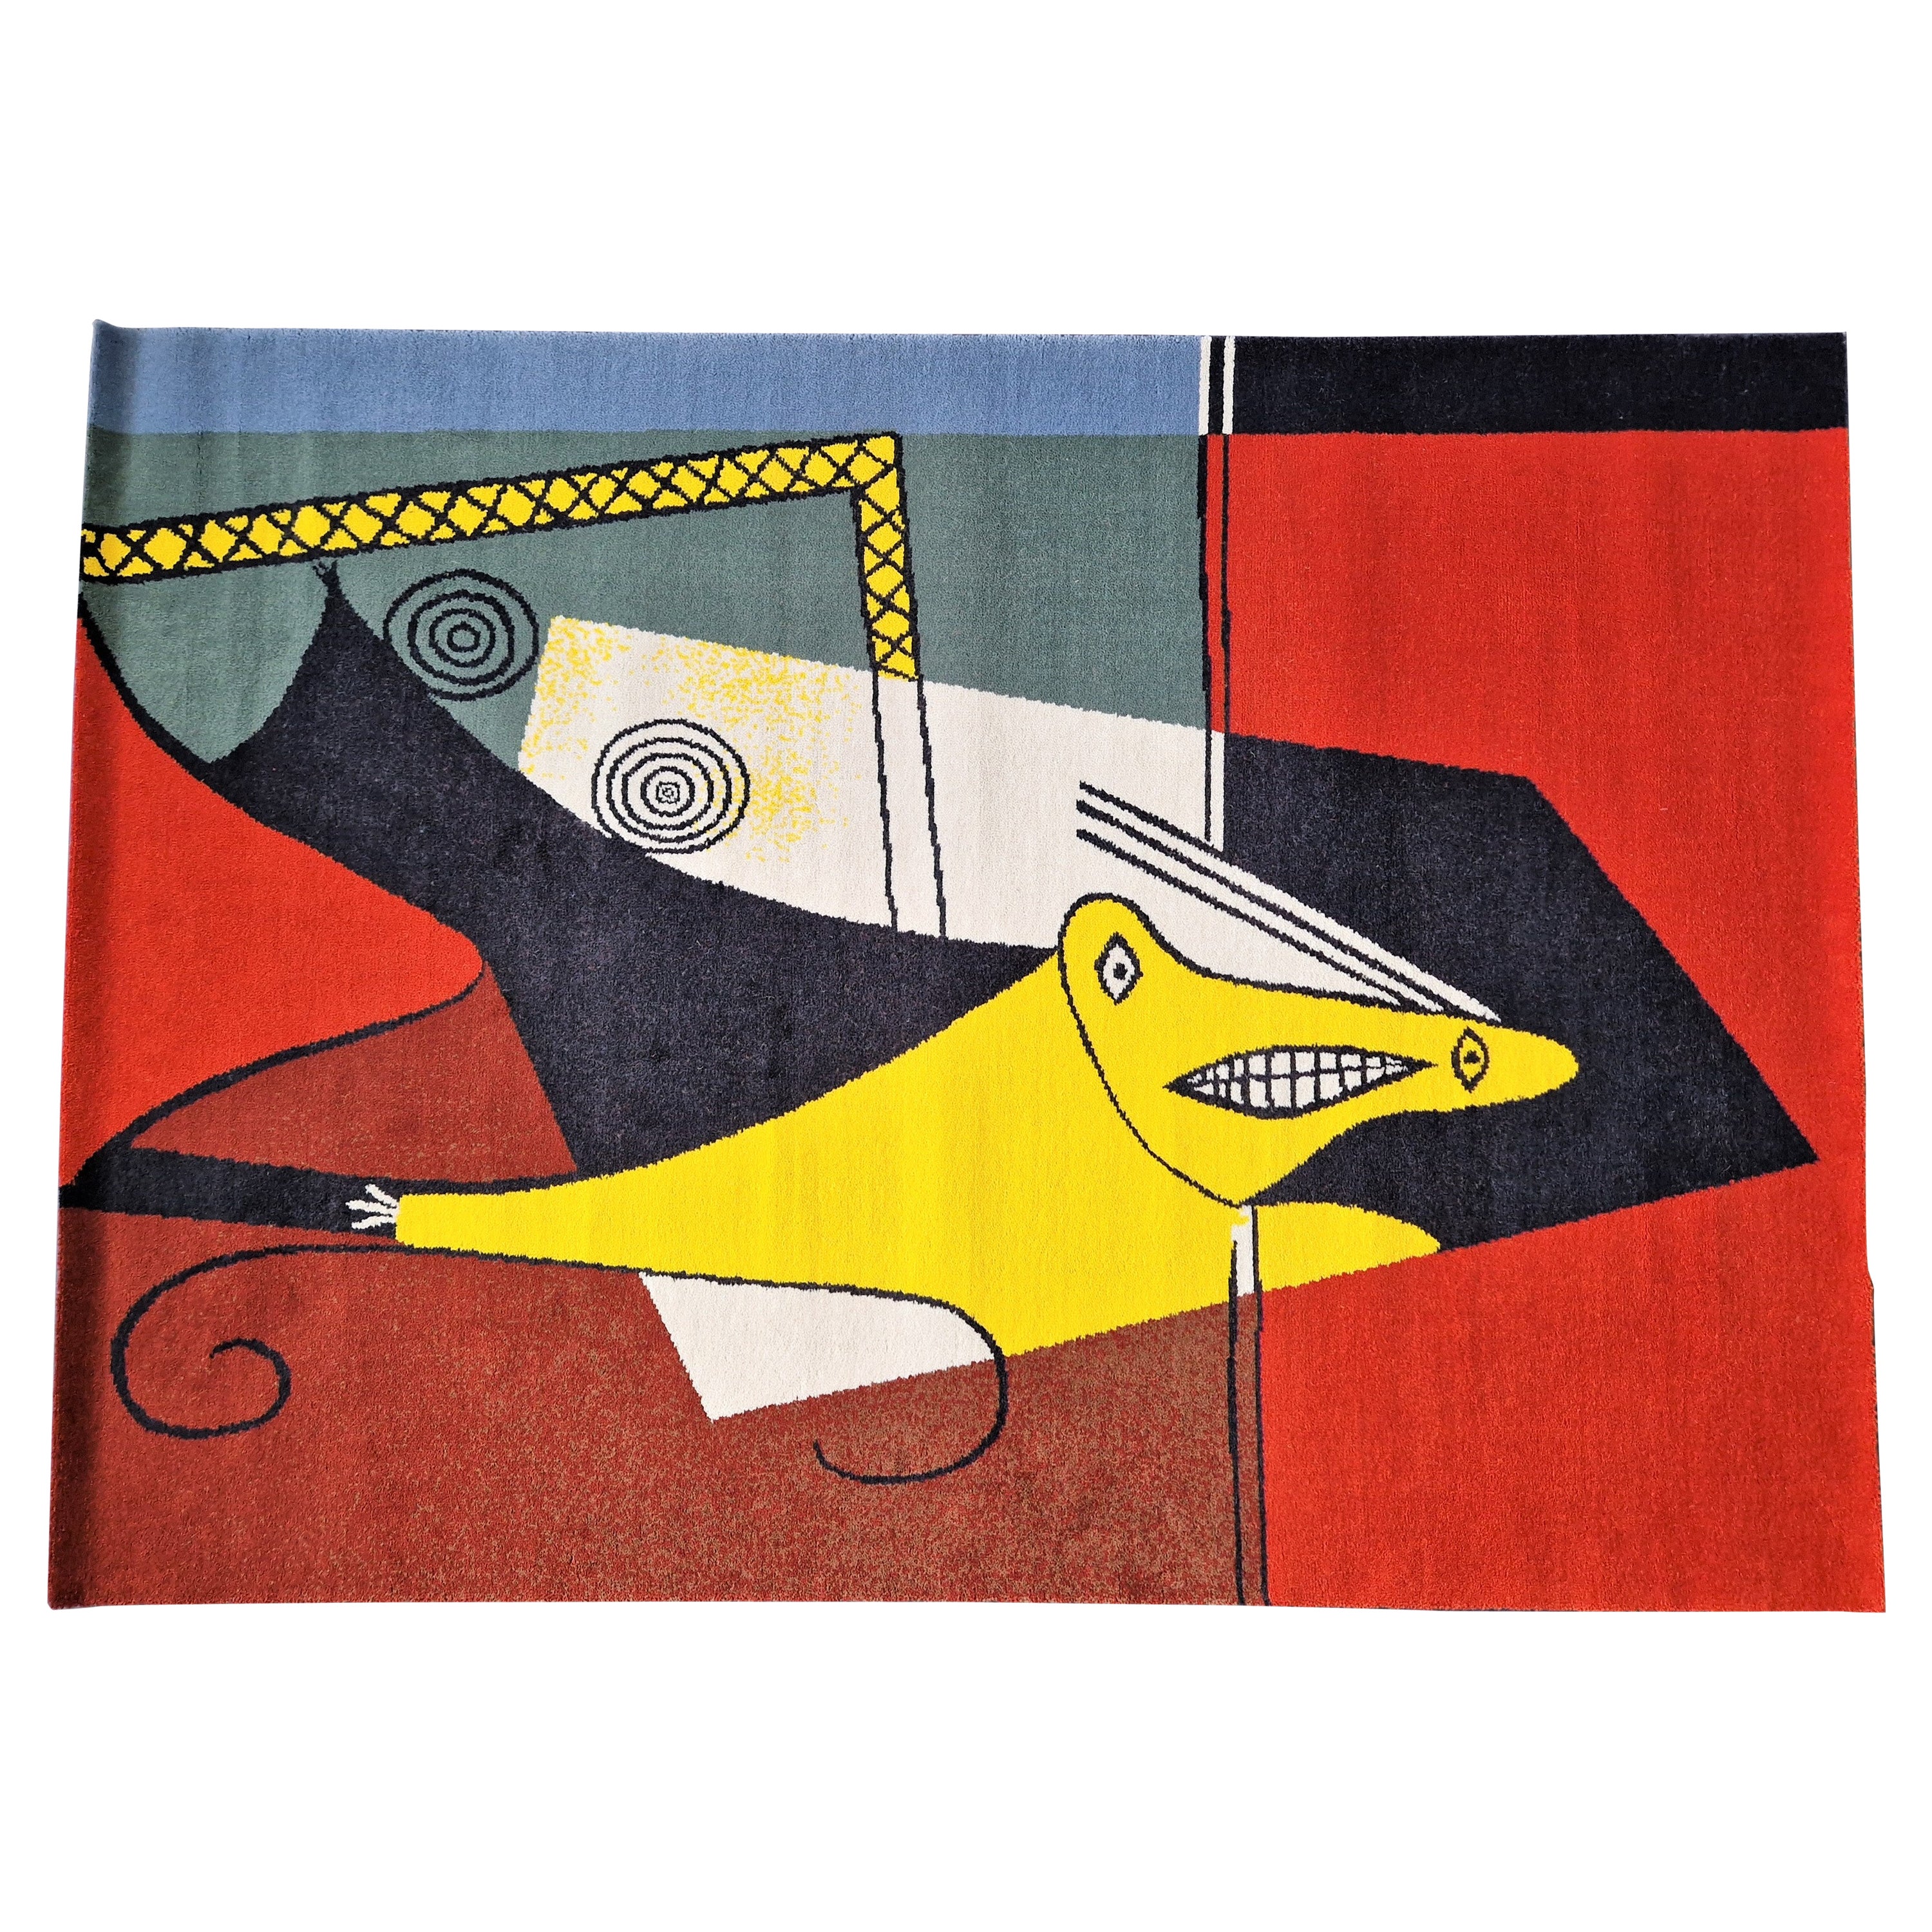 Large New Zealand Wool Carpet 'La Figura' After Artwork by Picasso Made by Desso For Sale